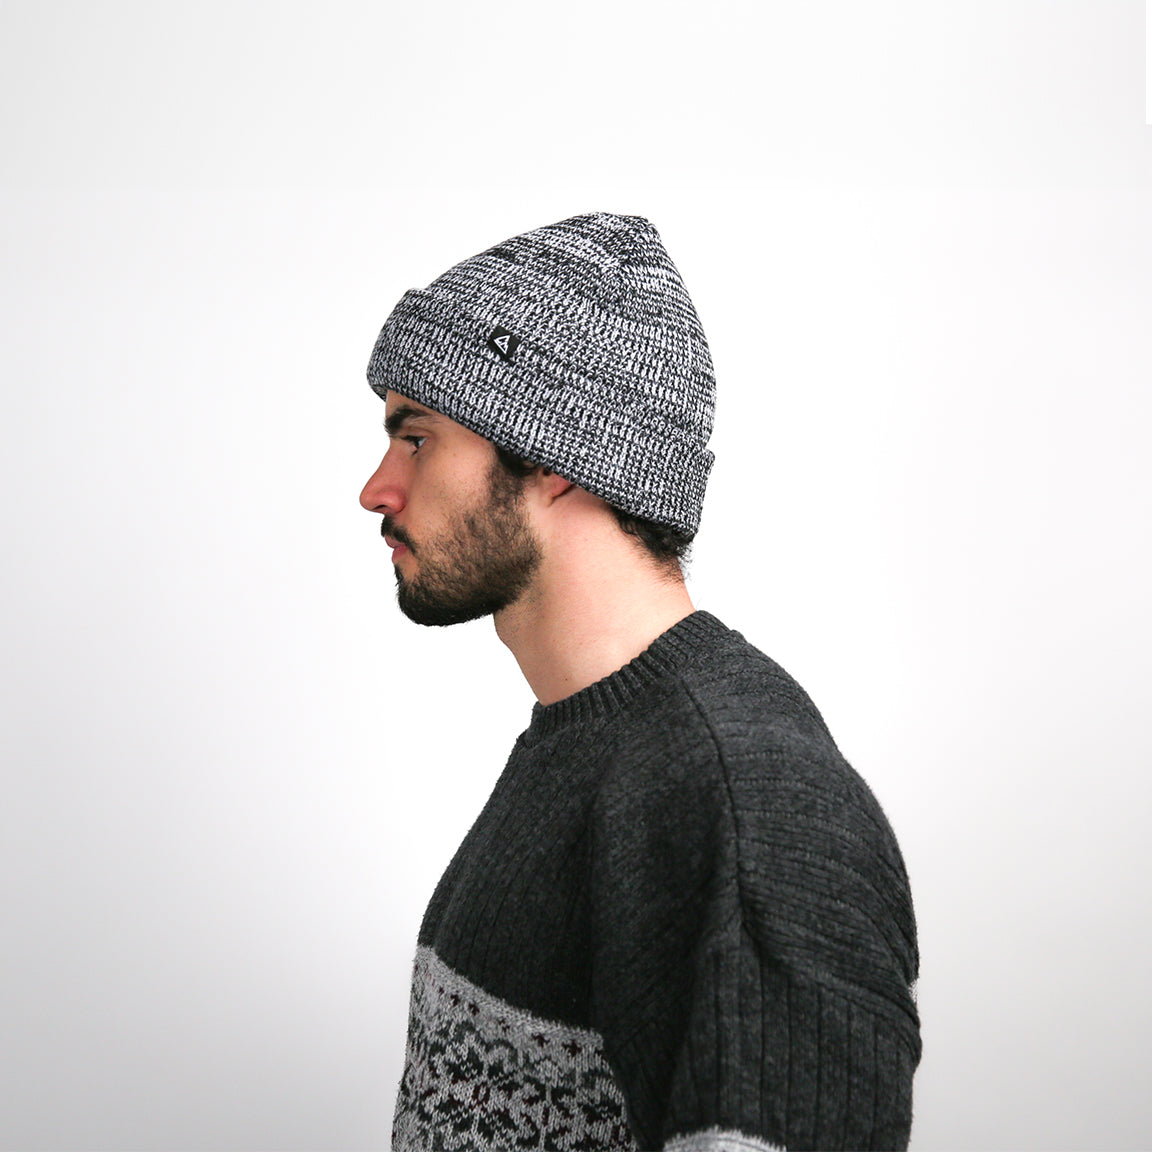 The two-tone grey knit beanie is viewed from the side, highlighting the intricate texture and the beanie's easygoing drape, complemented by a small black logo patch on the brim.